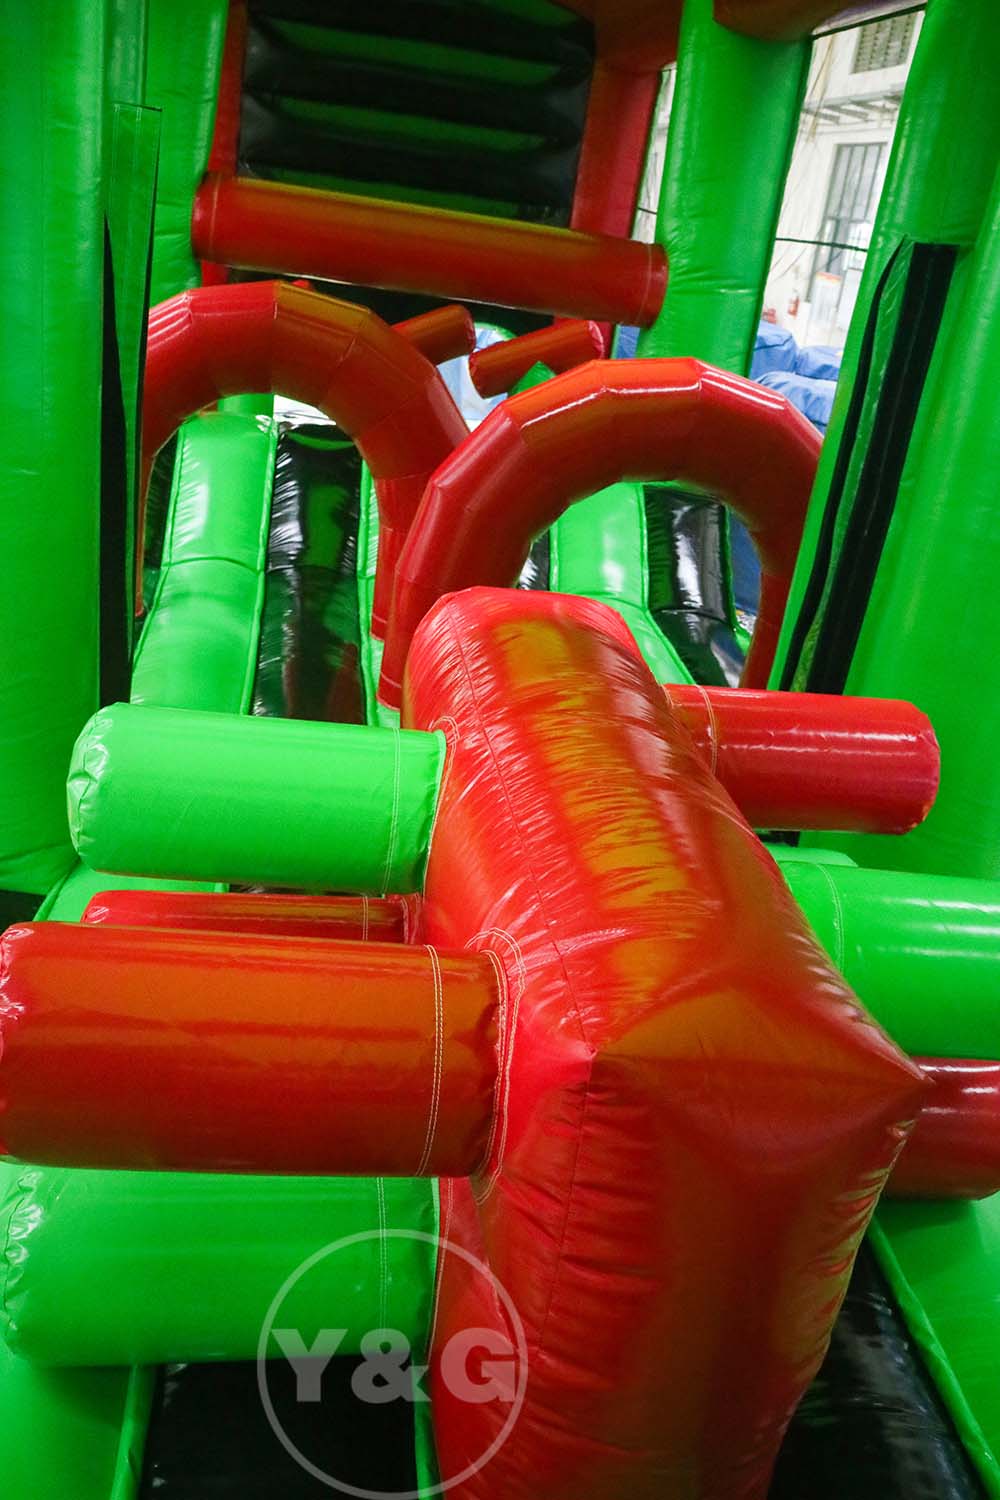 inflatable green obstacle courseYGO56